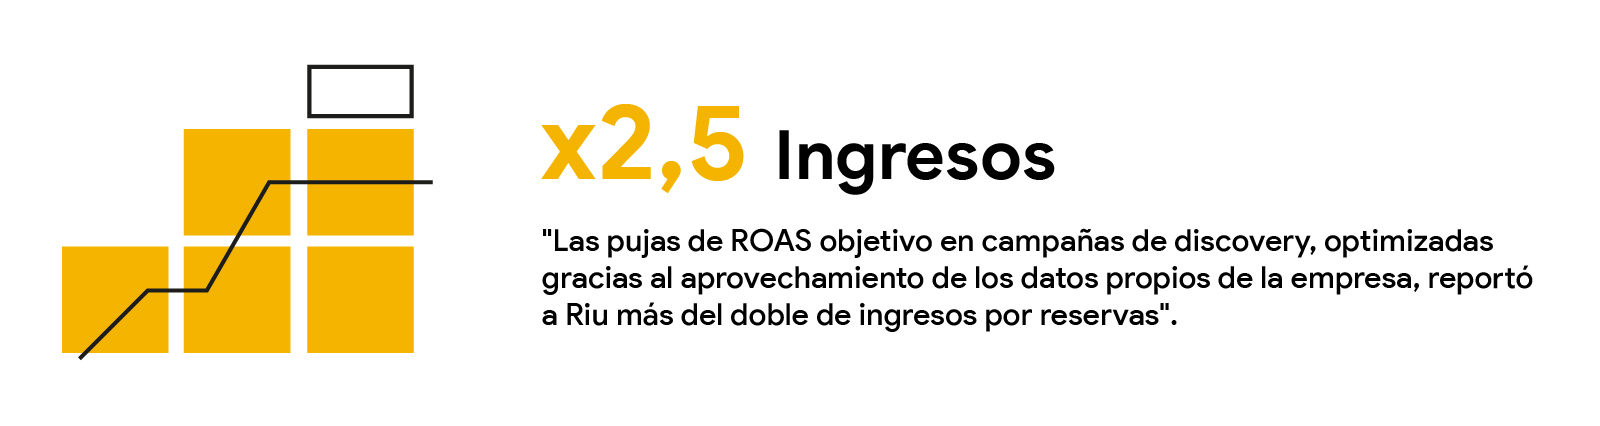 Increasing graph: for two point five in revenue, the target ROAS bids in discovery campaigns, optimized thanks to the use of the company's own data, reported Riu more than double the revenue from bookings.